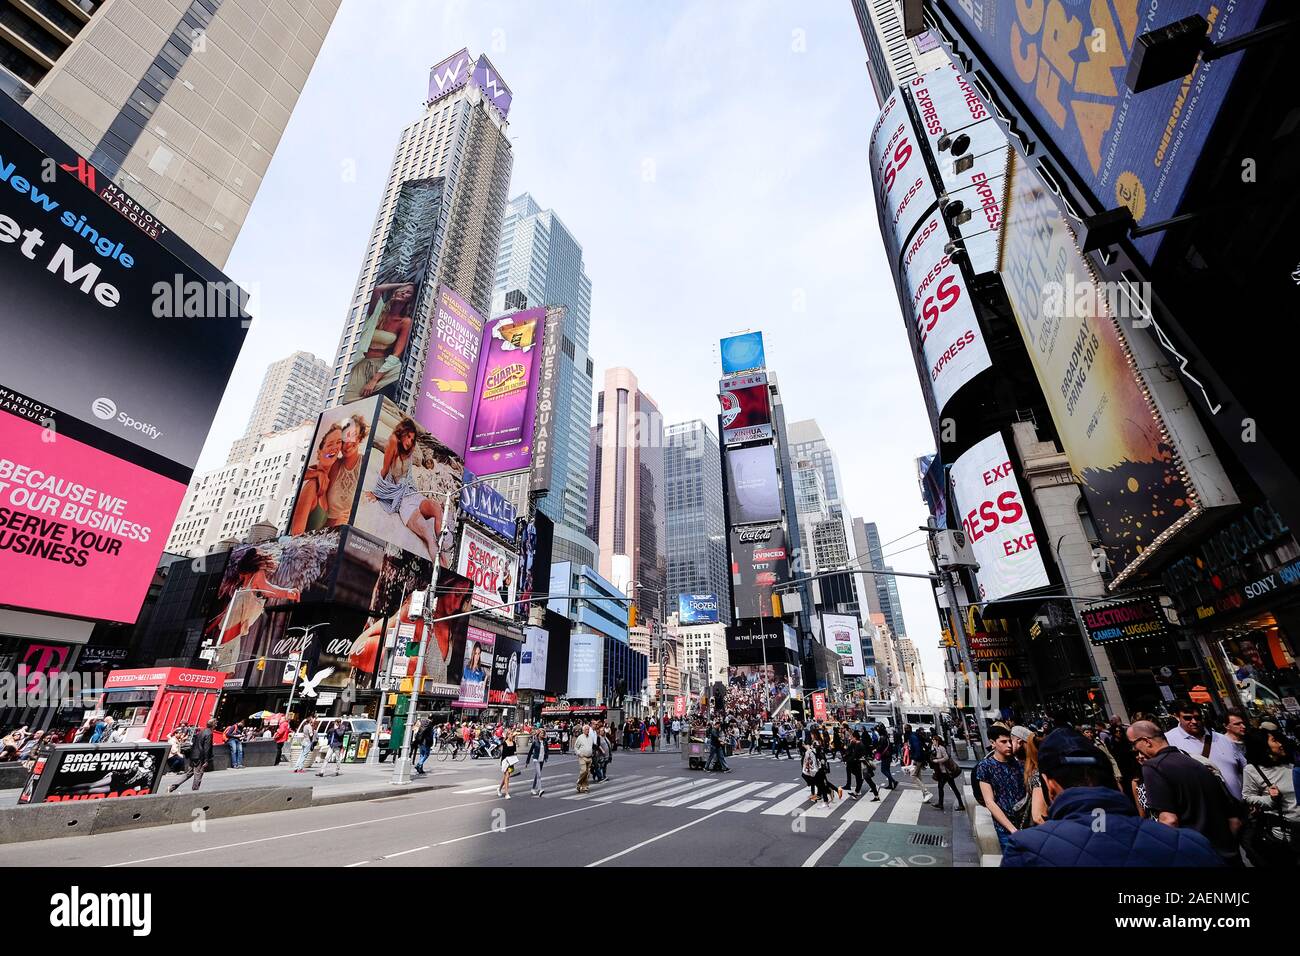 Wide angle view of Times Square in New York Stock Photo